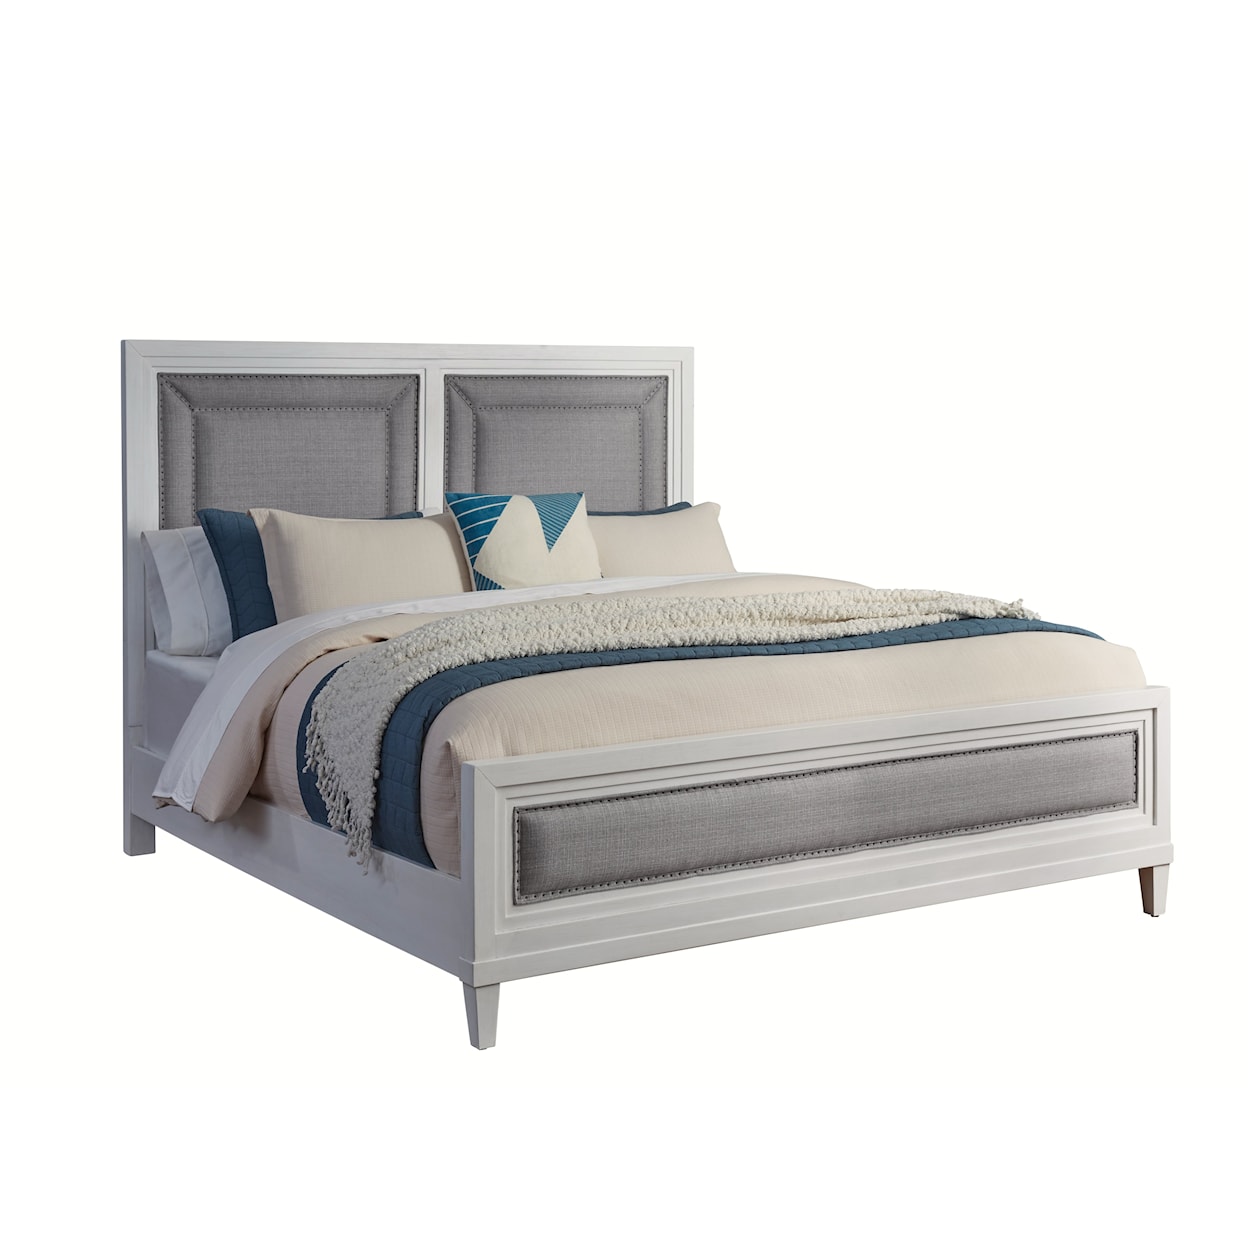 American Woodcrafters Dunescape King Upholstered Bed